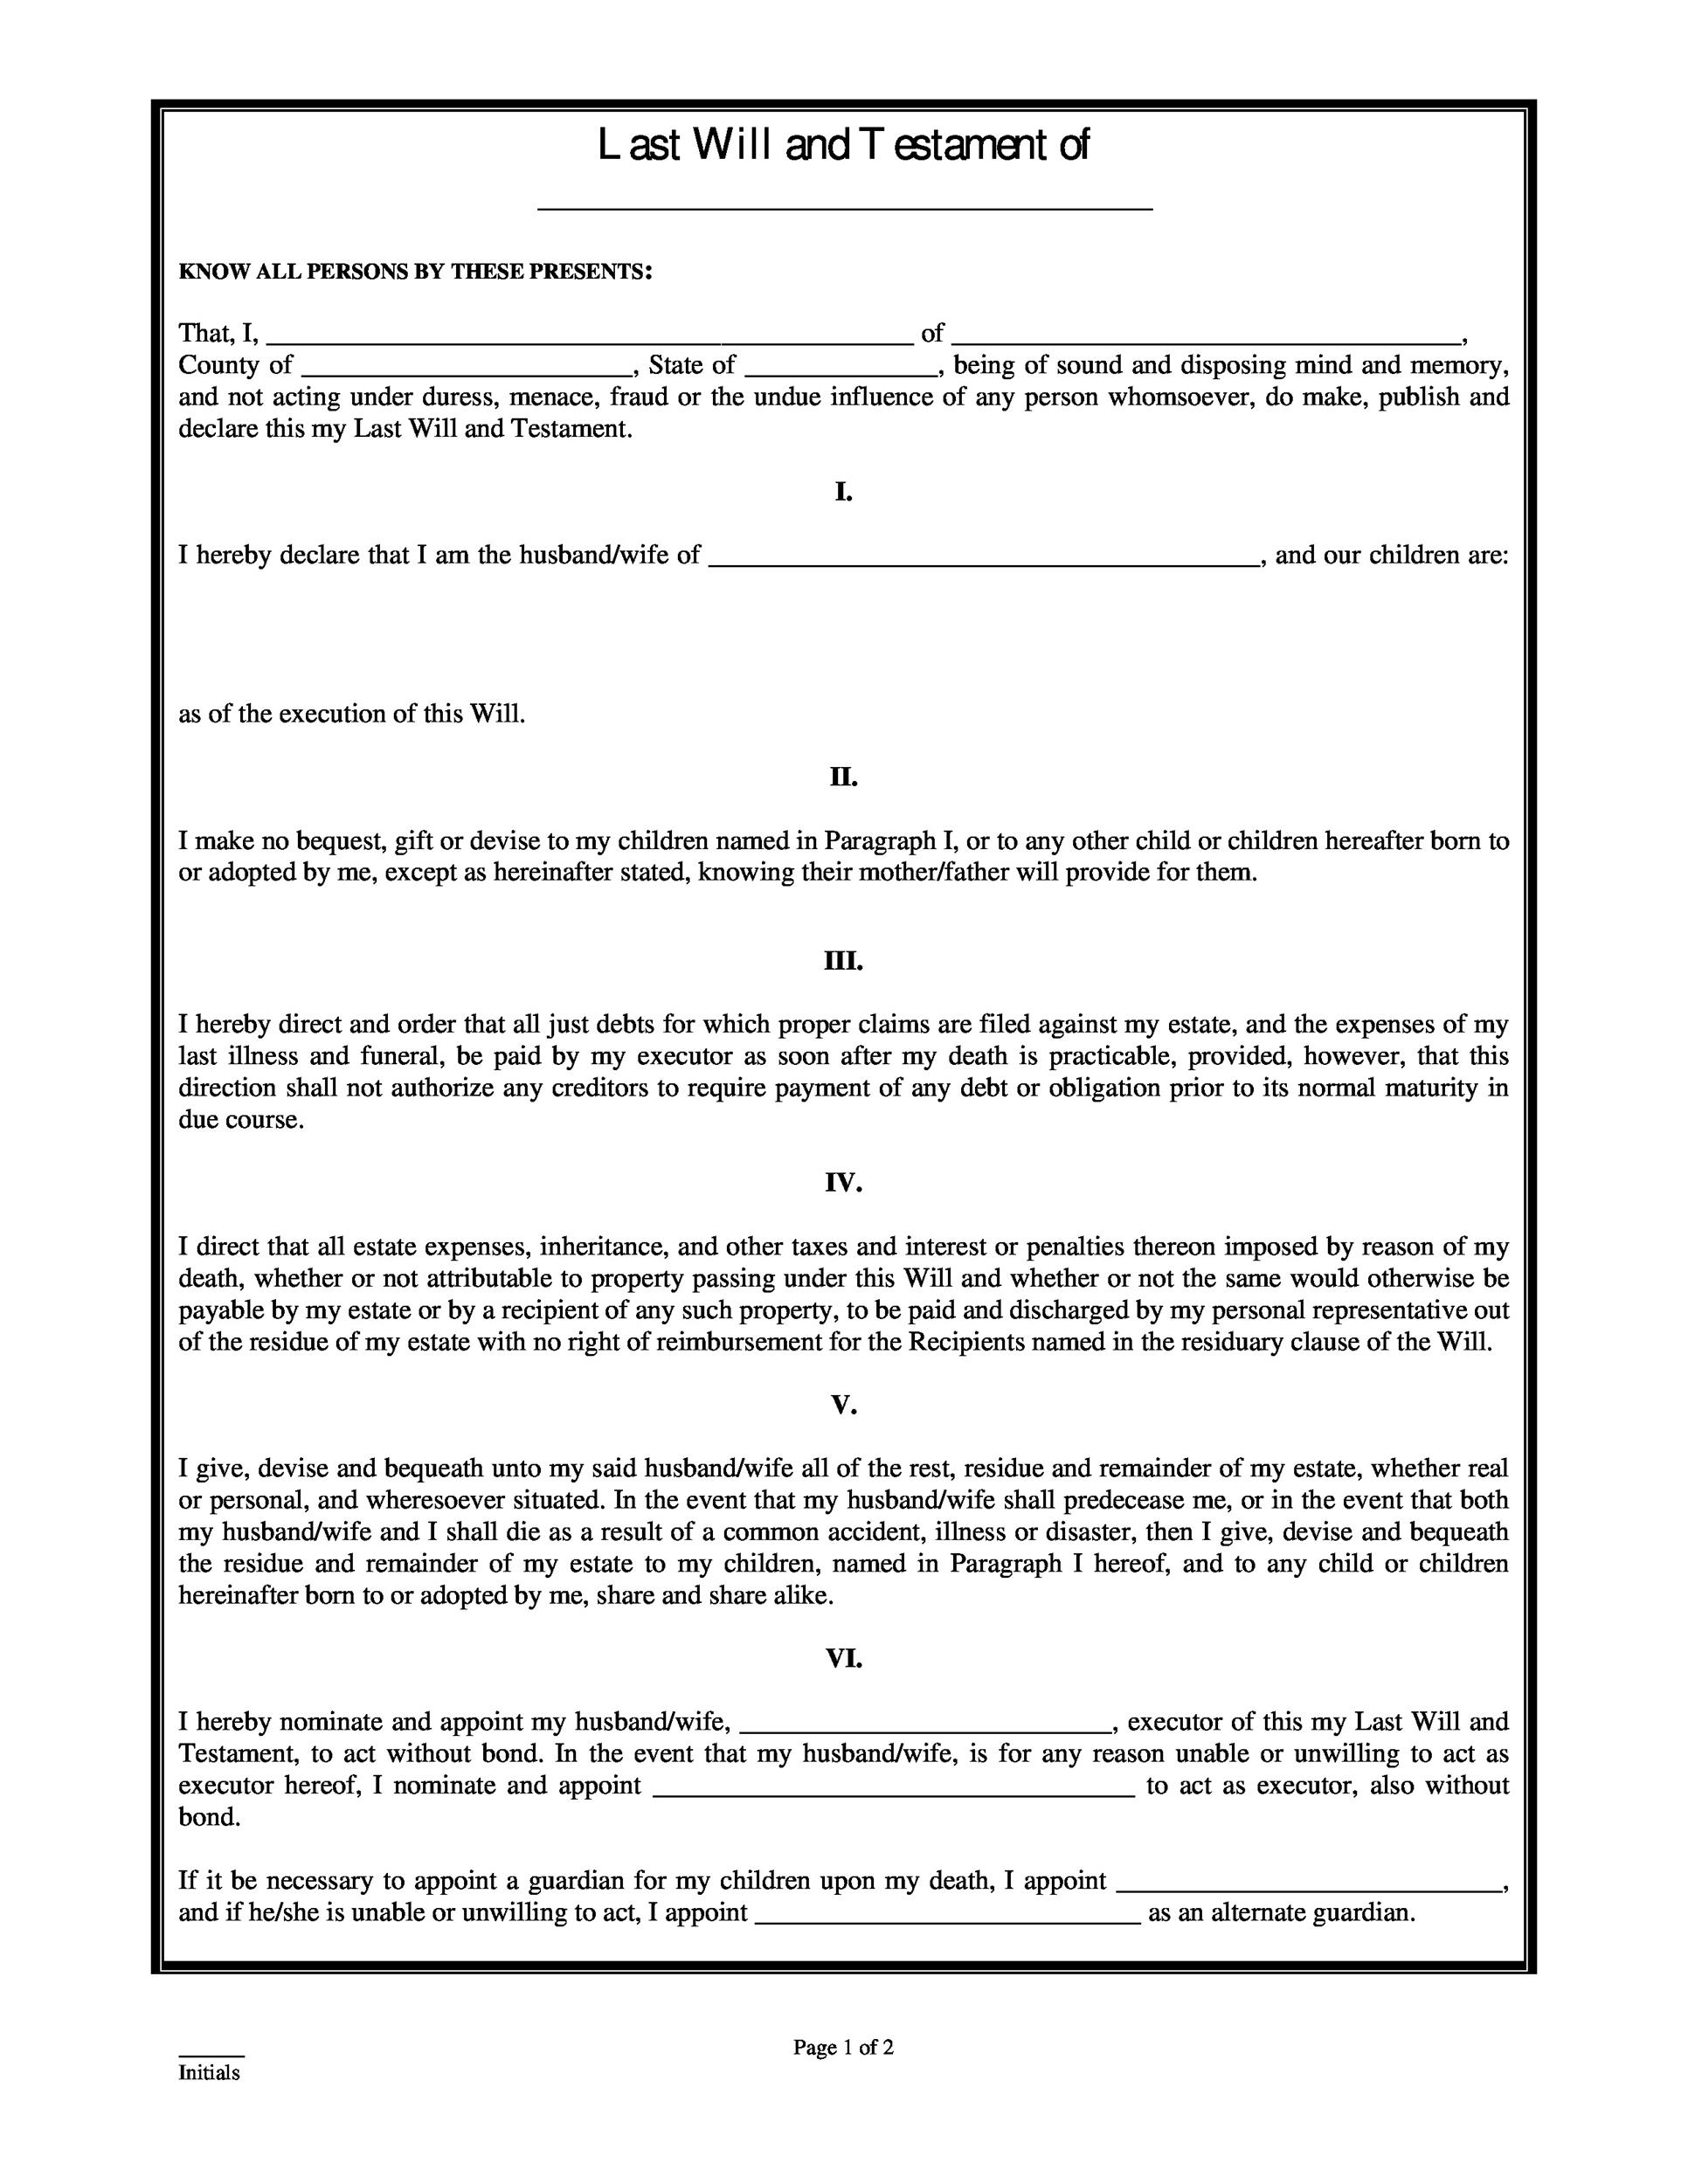 39 Last Will And Testament Forms Templates TemplateLab